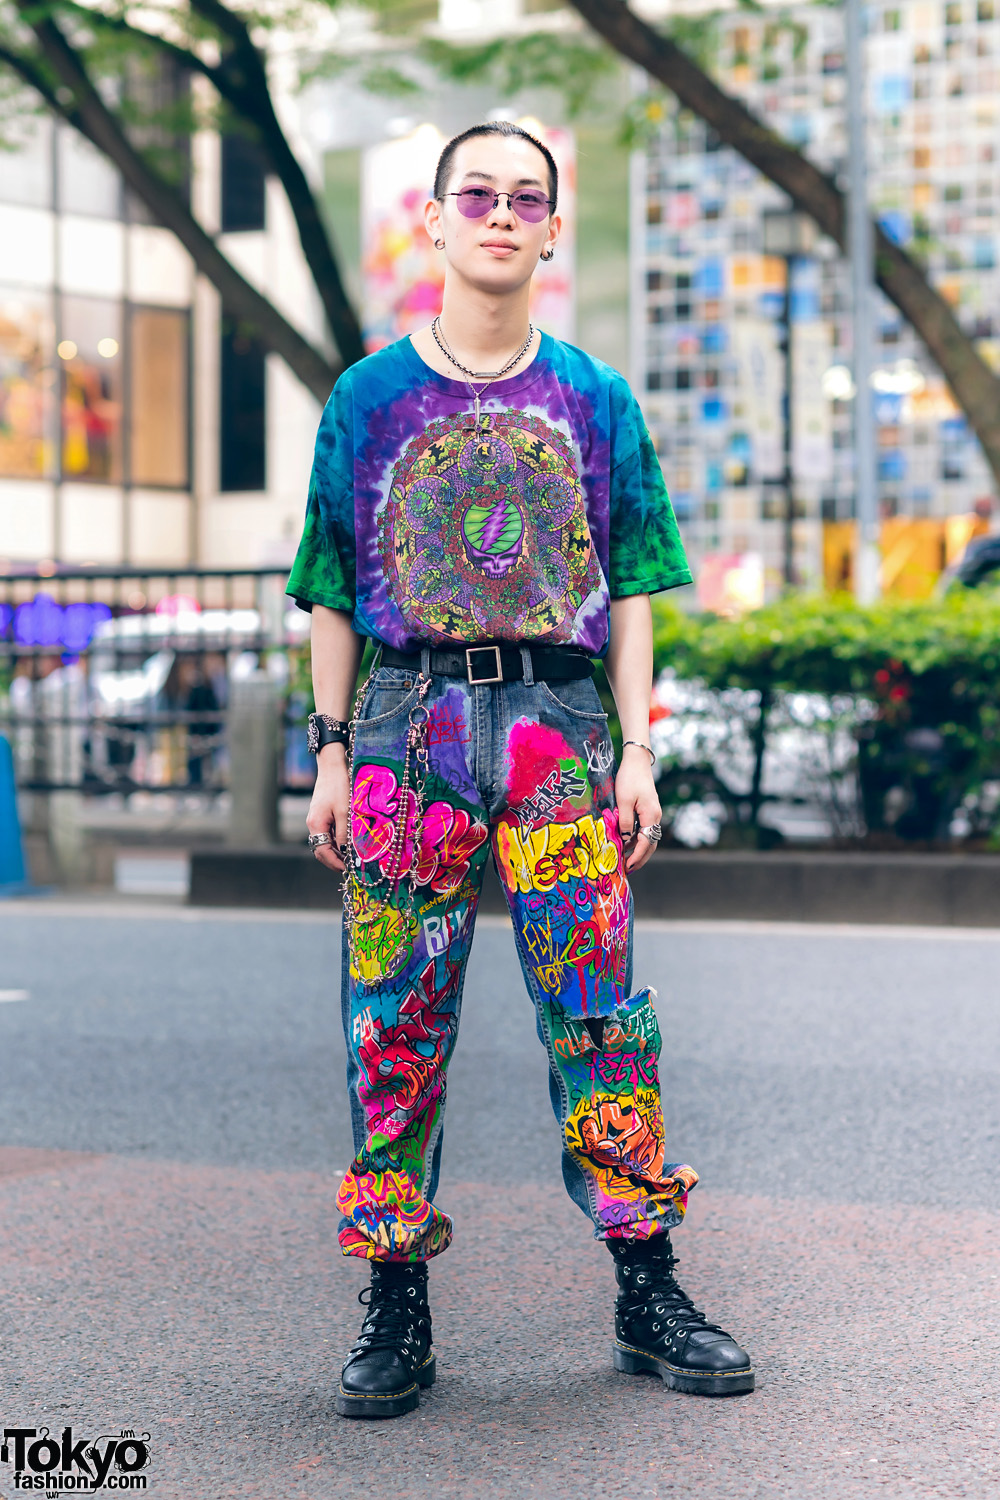 Colorful Harajuku Streetwear w/ Grateful Dead Shirt, Hand Painted Graffiti Jeans, Nacht & Dr. Martens Boots